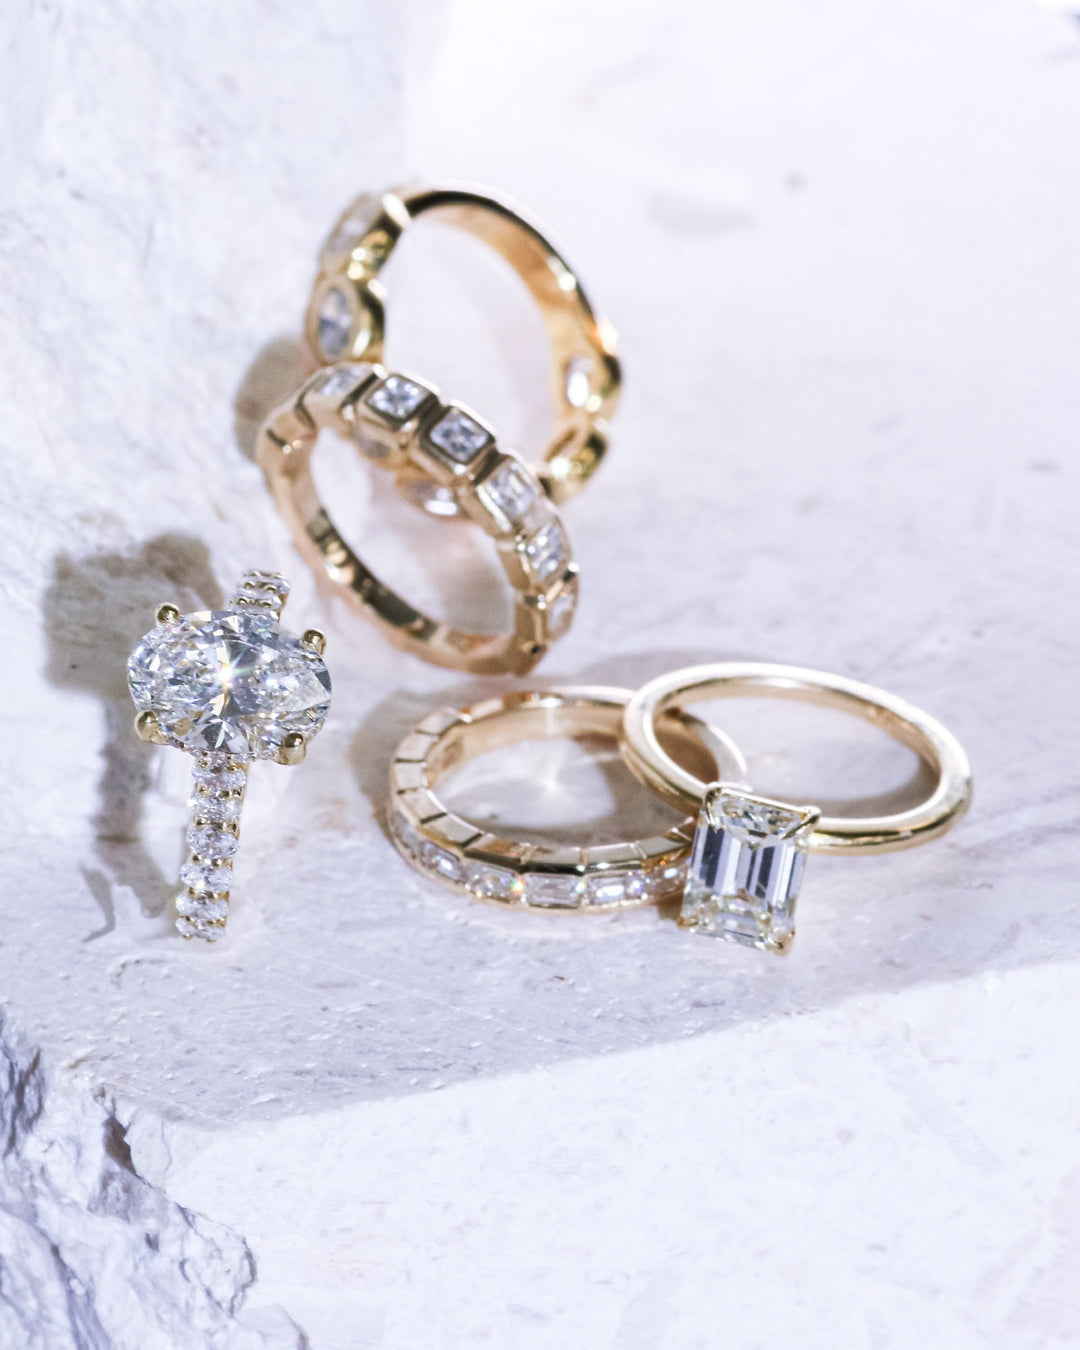 Understanding Engagement Ring Styles: Finding Your Perfect Match